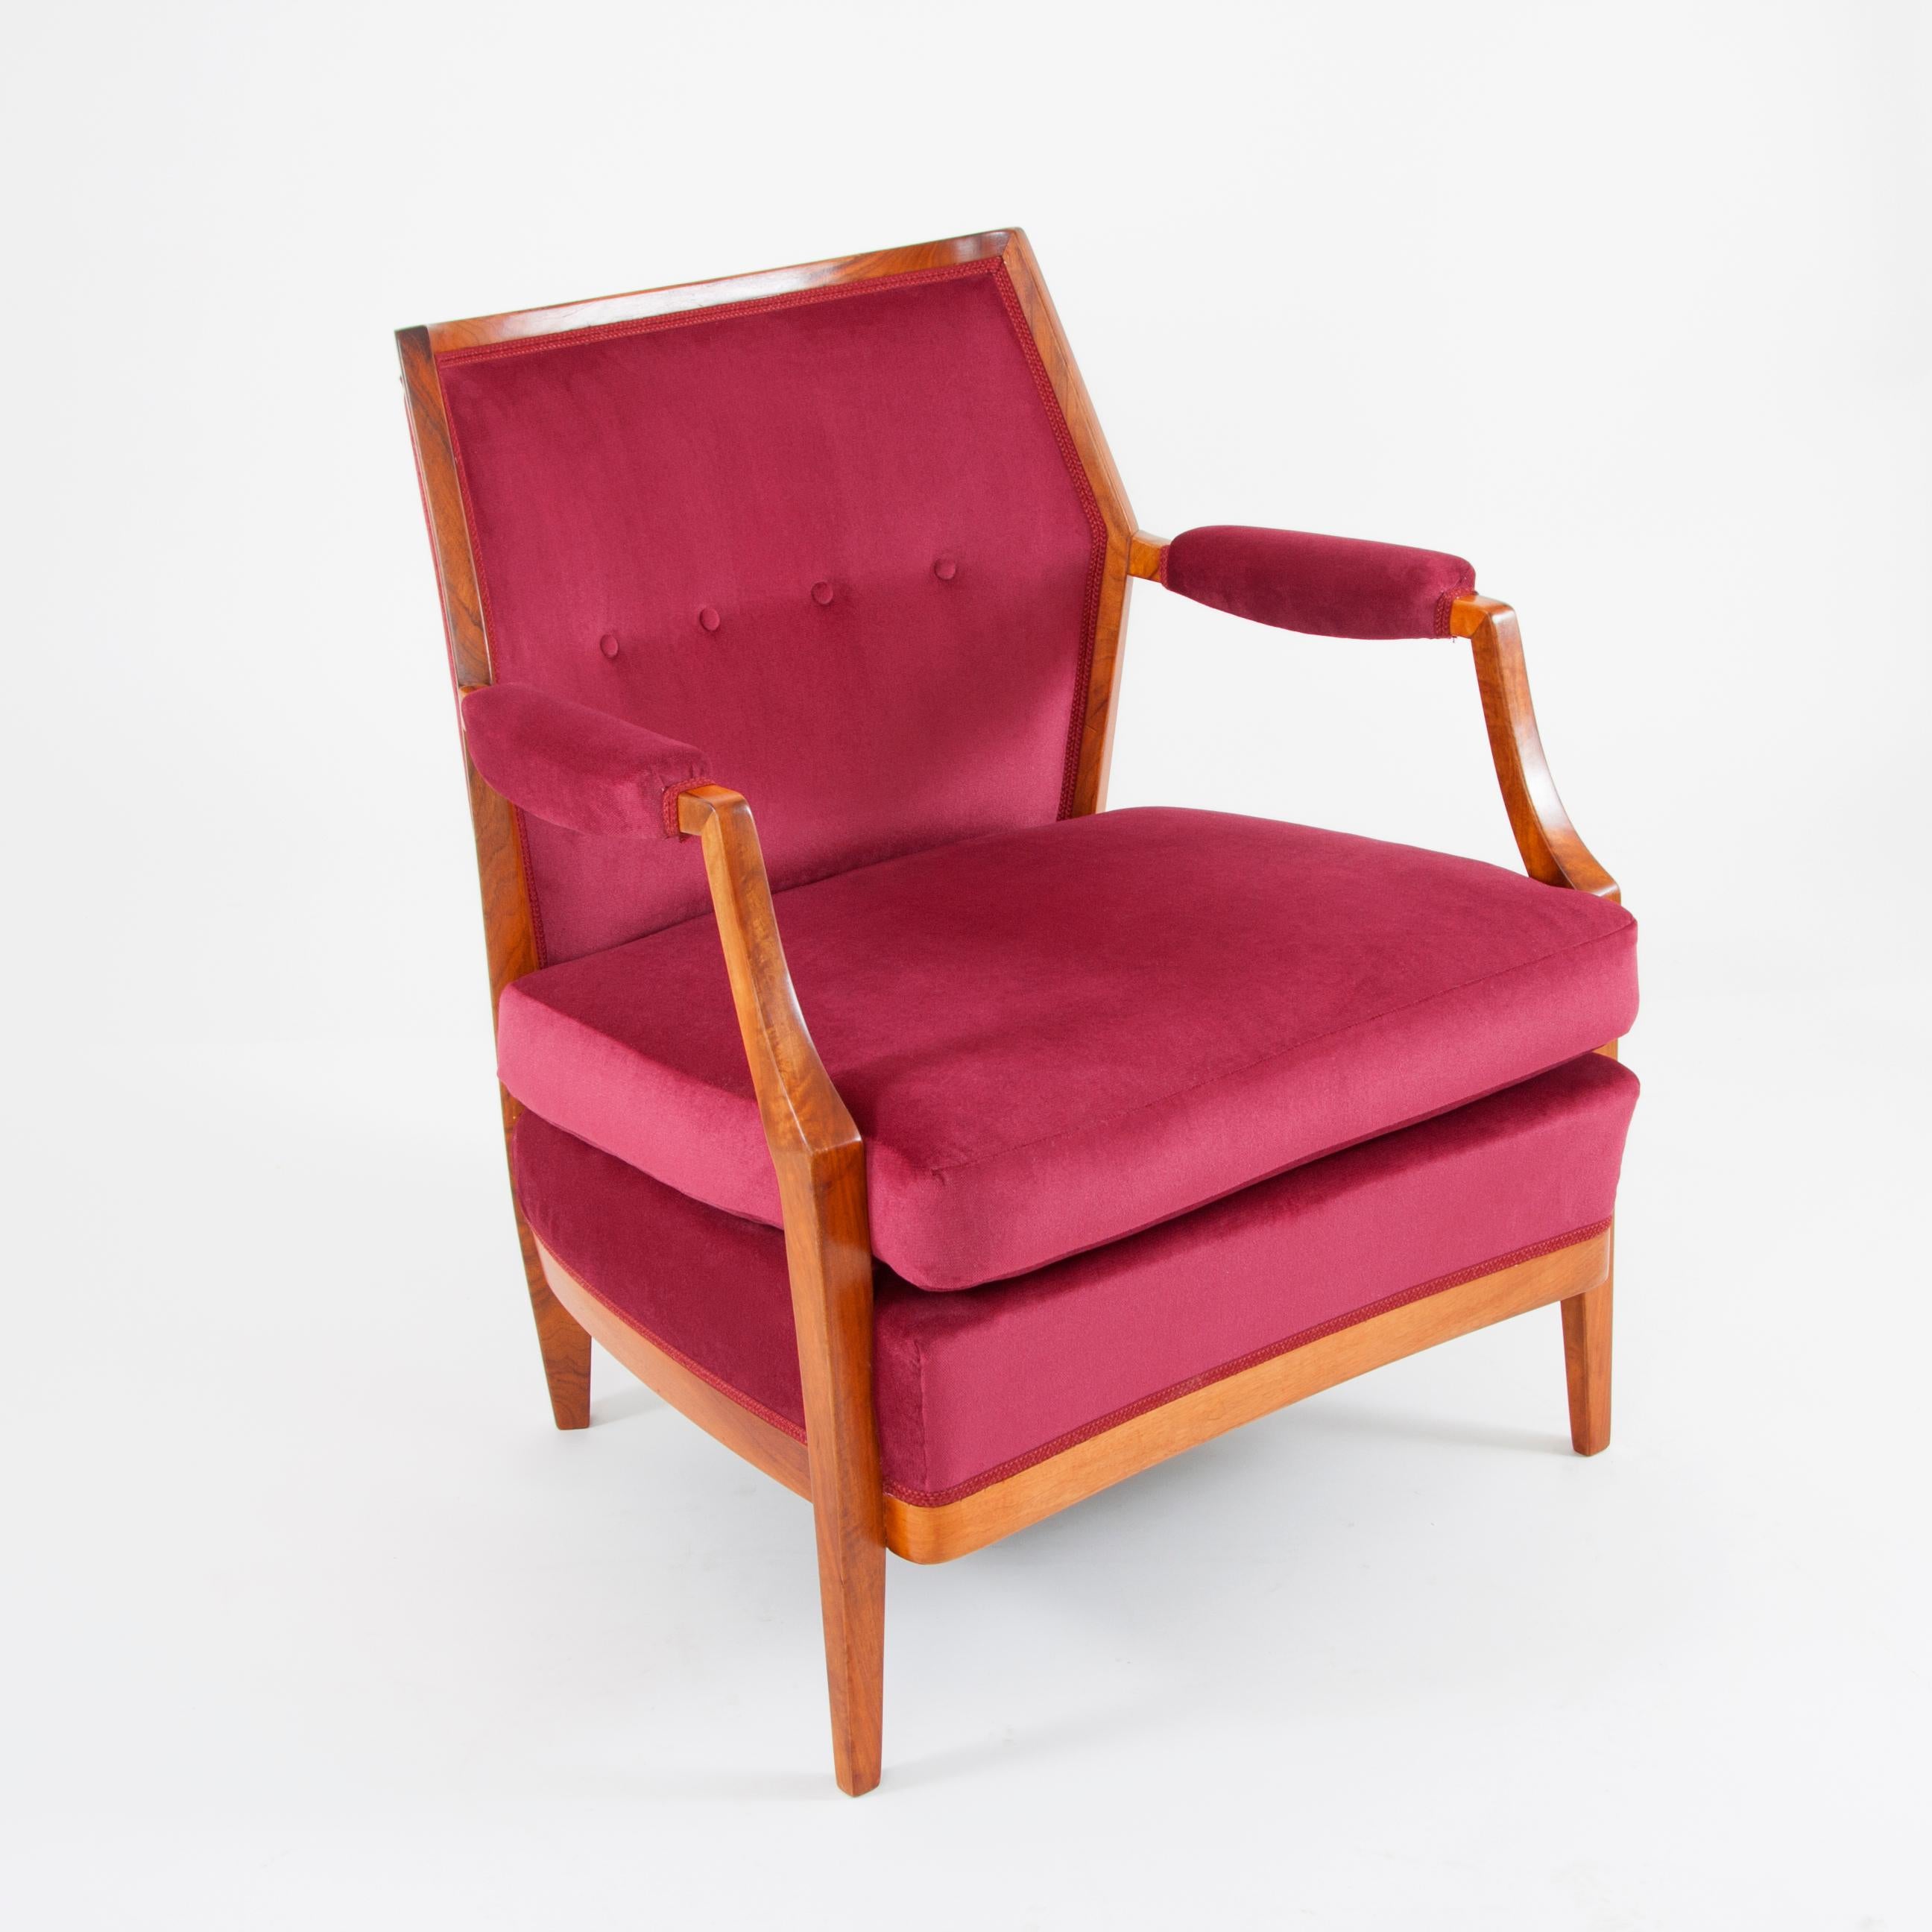 One beautiful and comfortable Mid-Century Modern club chair from the 1950s. Executed in Austria, made of walnut with a lovely purple velvet upholstery. Restored, in excellent condition.